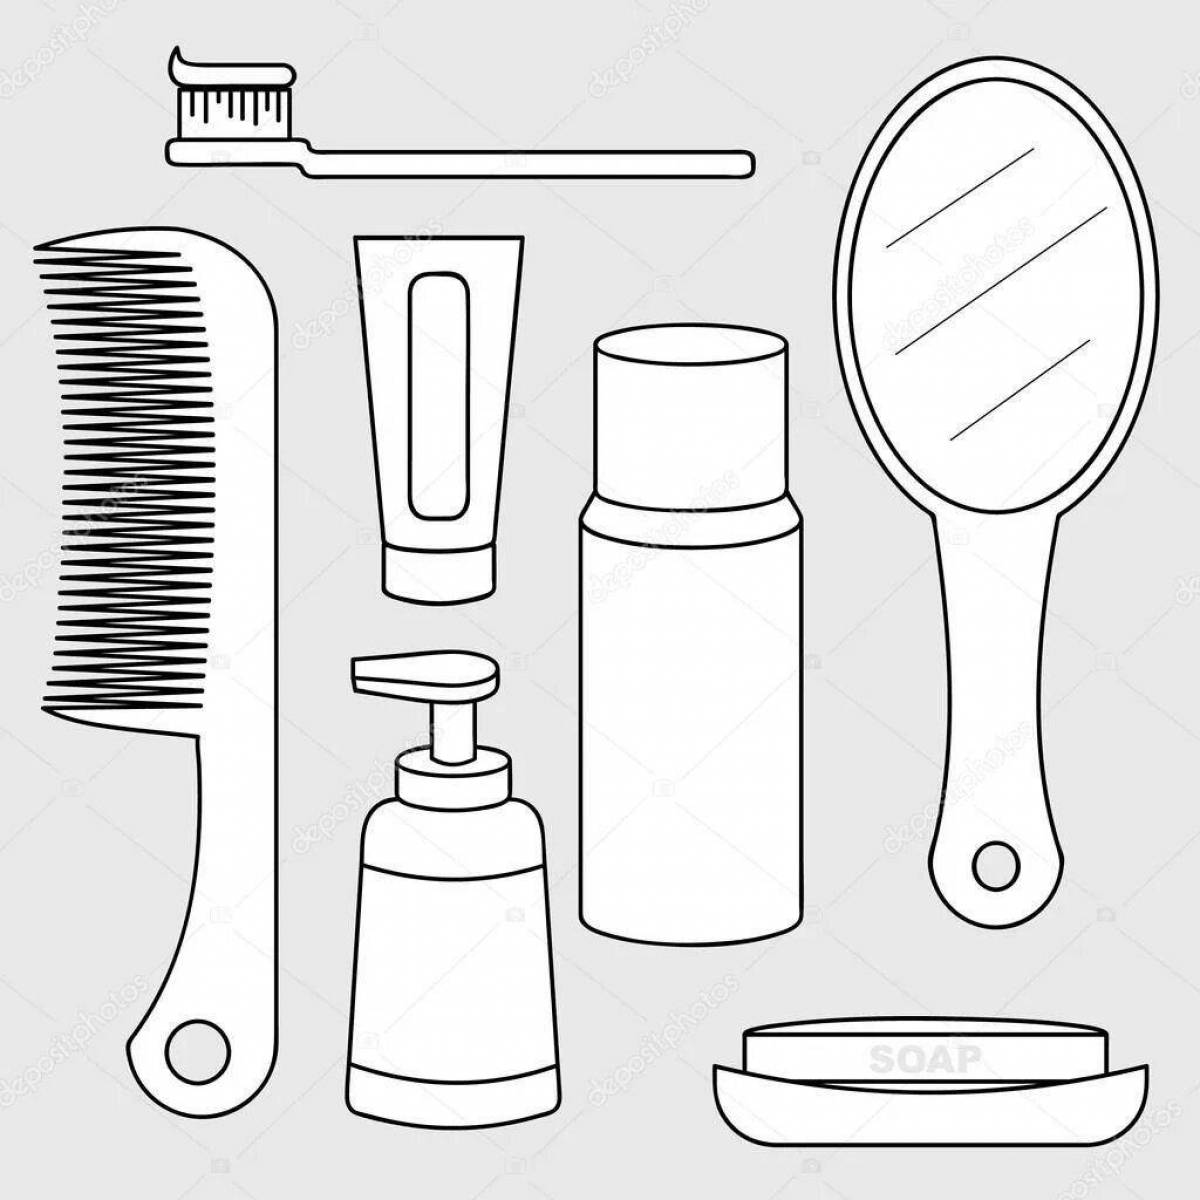 Attractive coloring page of hygiene products for kids